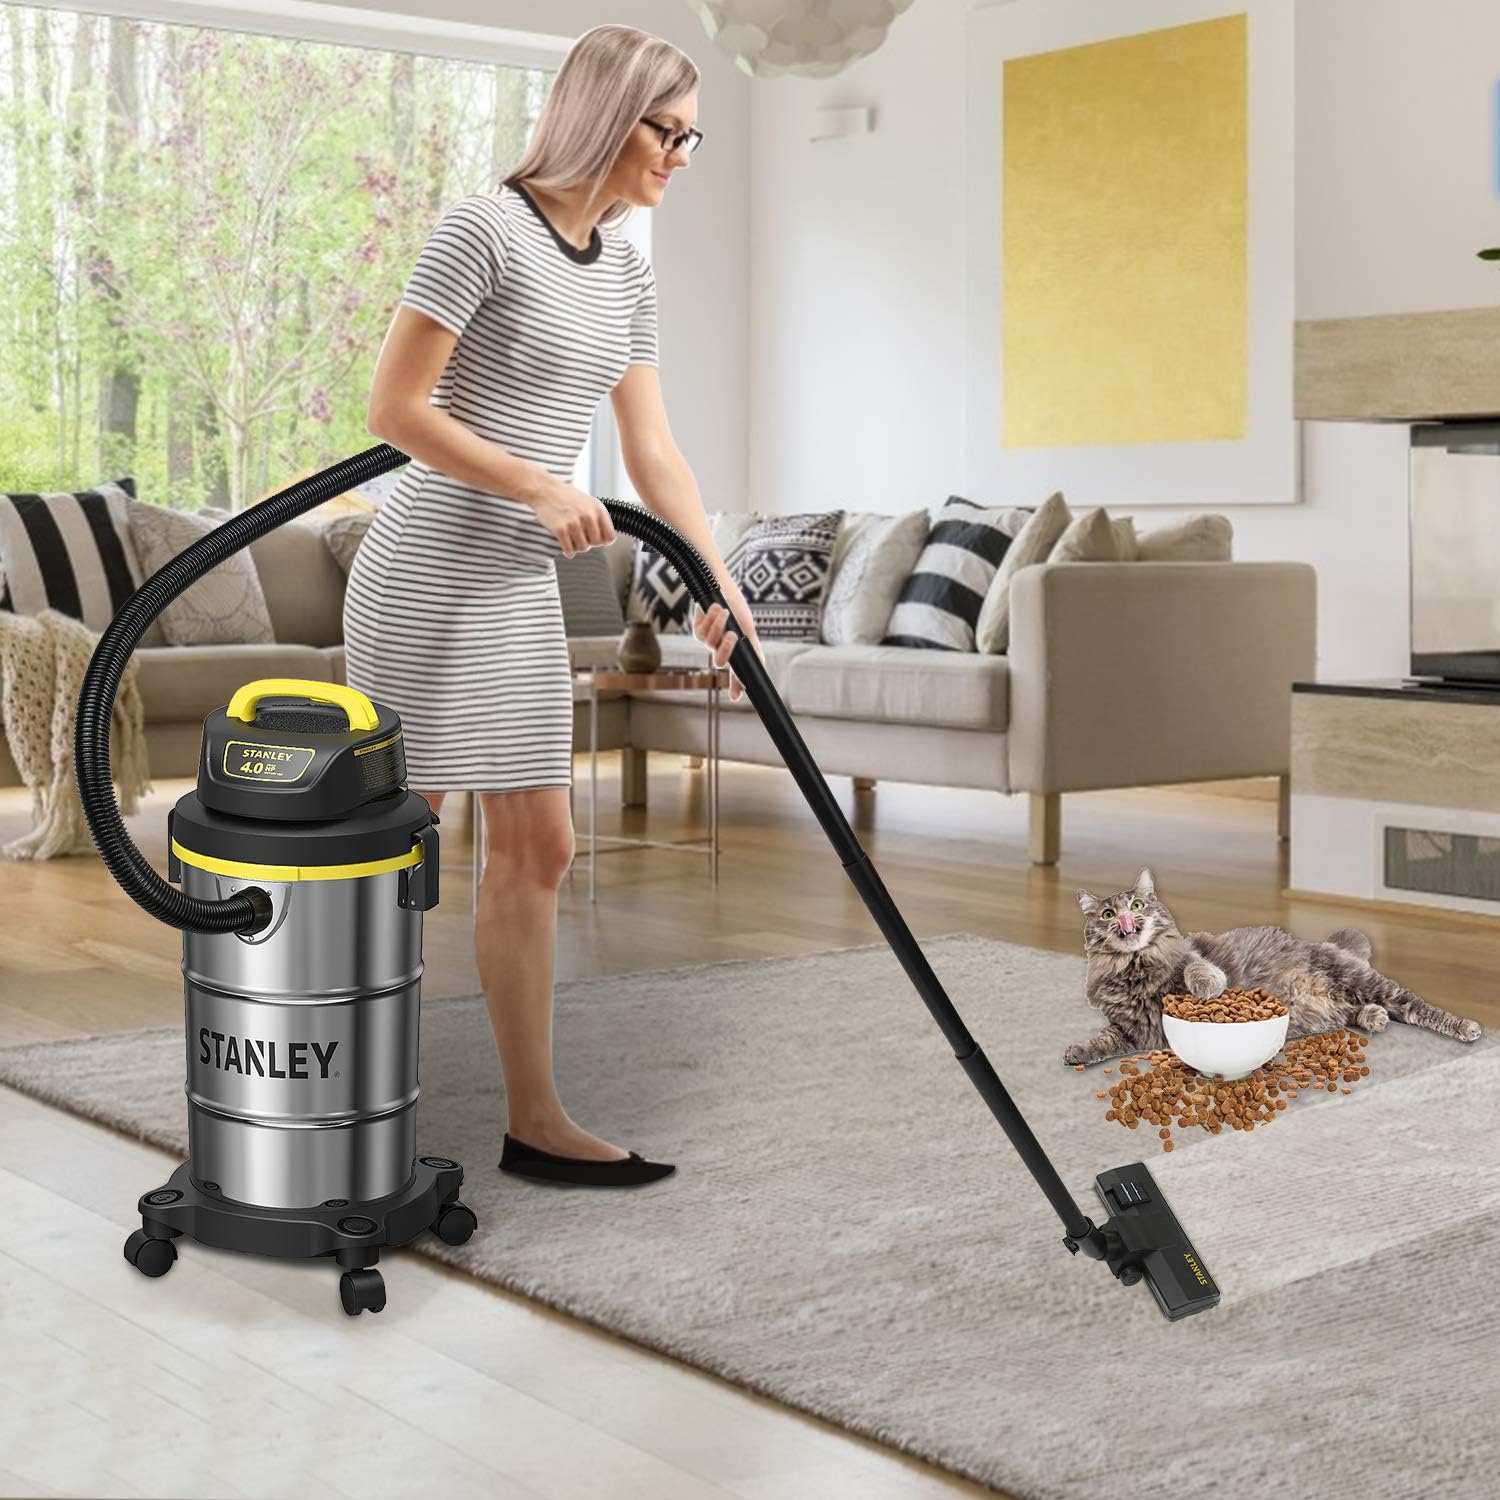 Stanley Portable Stainless Wet/Dry Vacuum 8 Gal